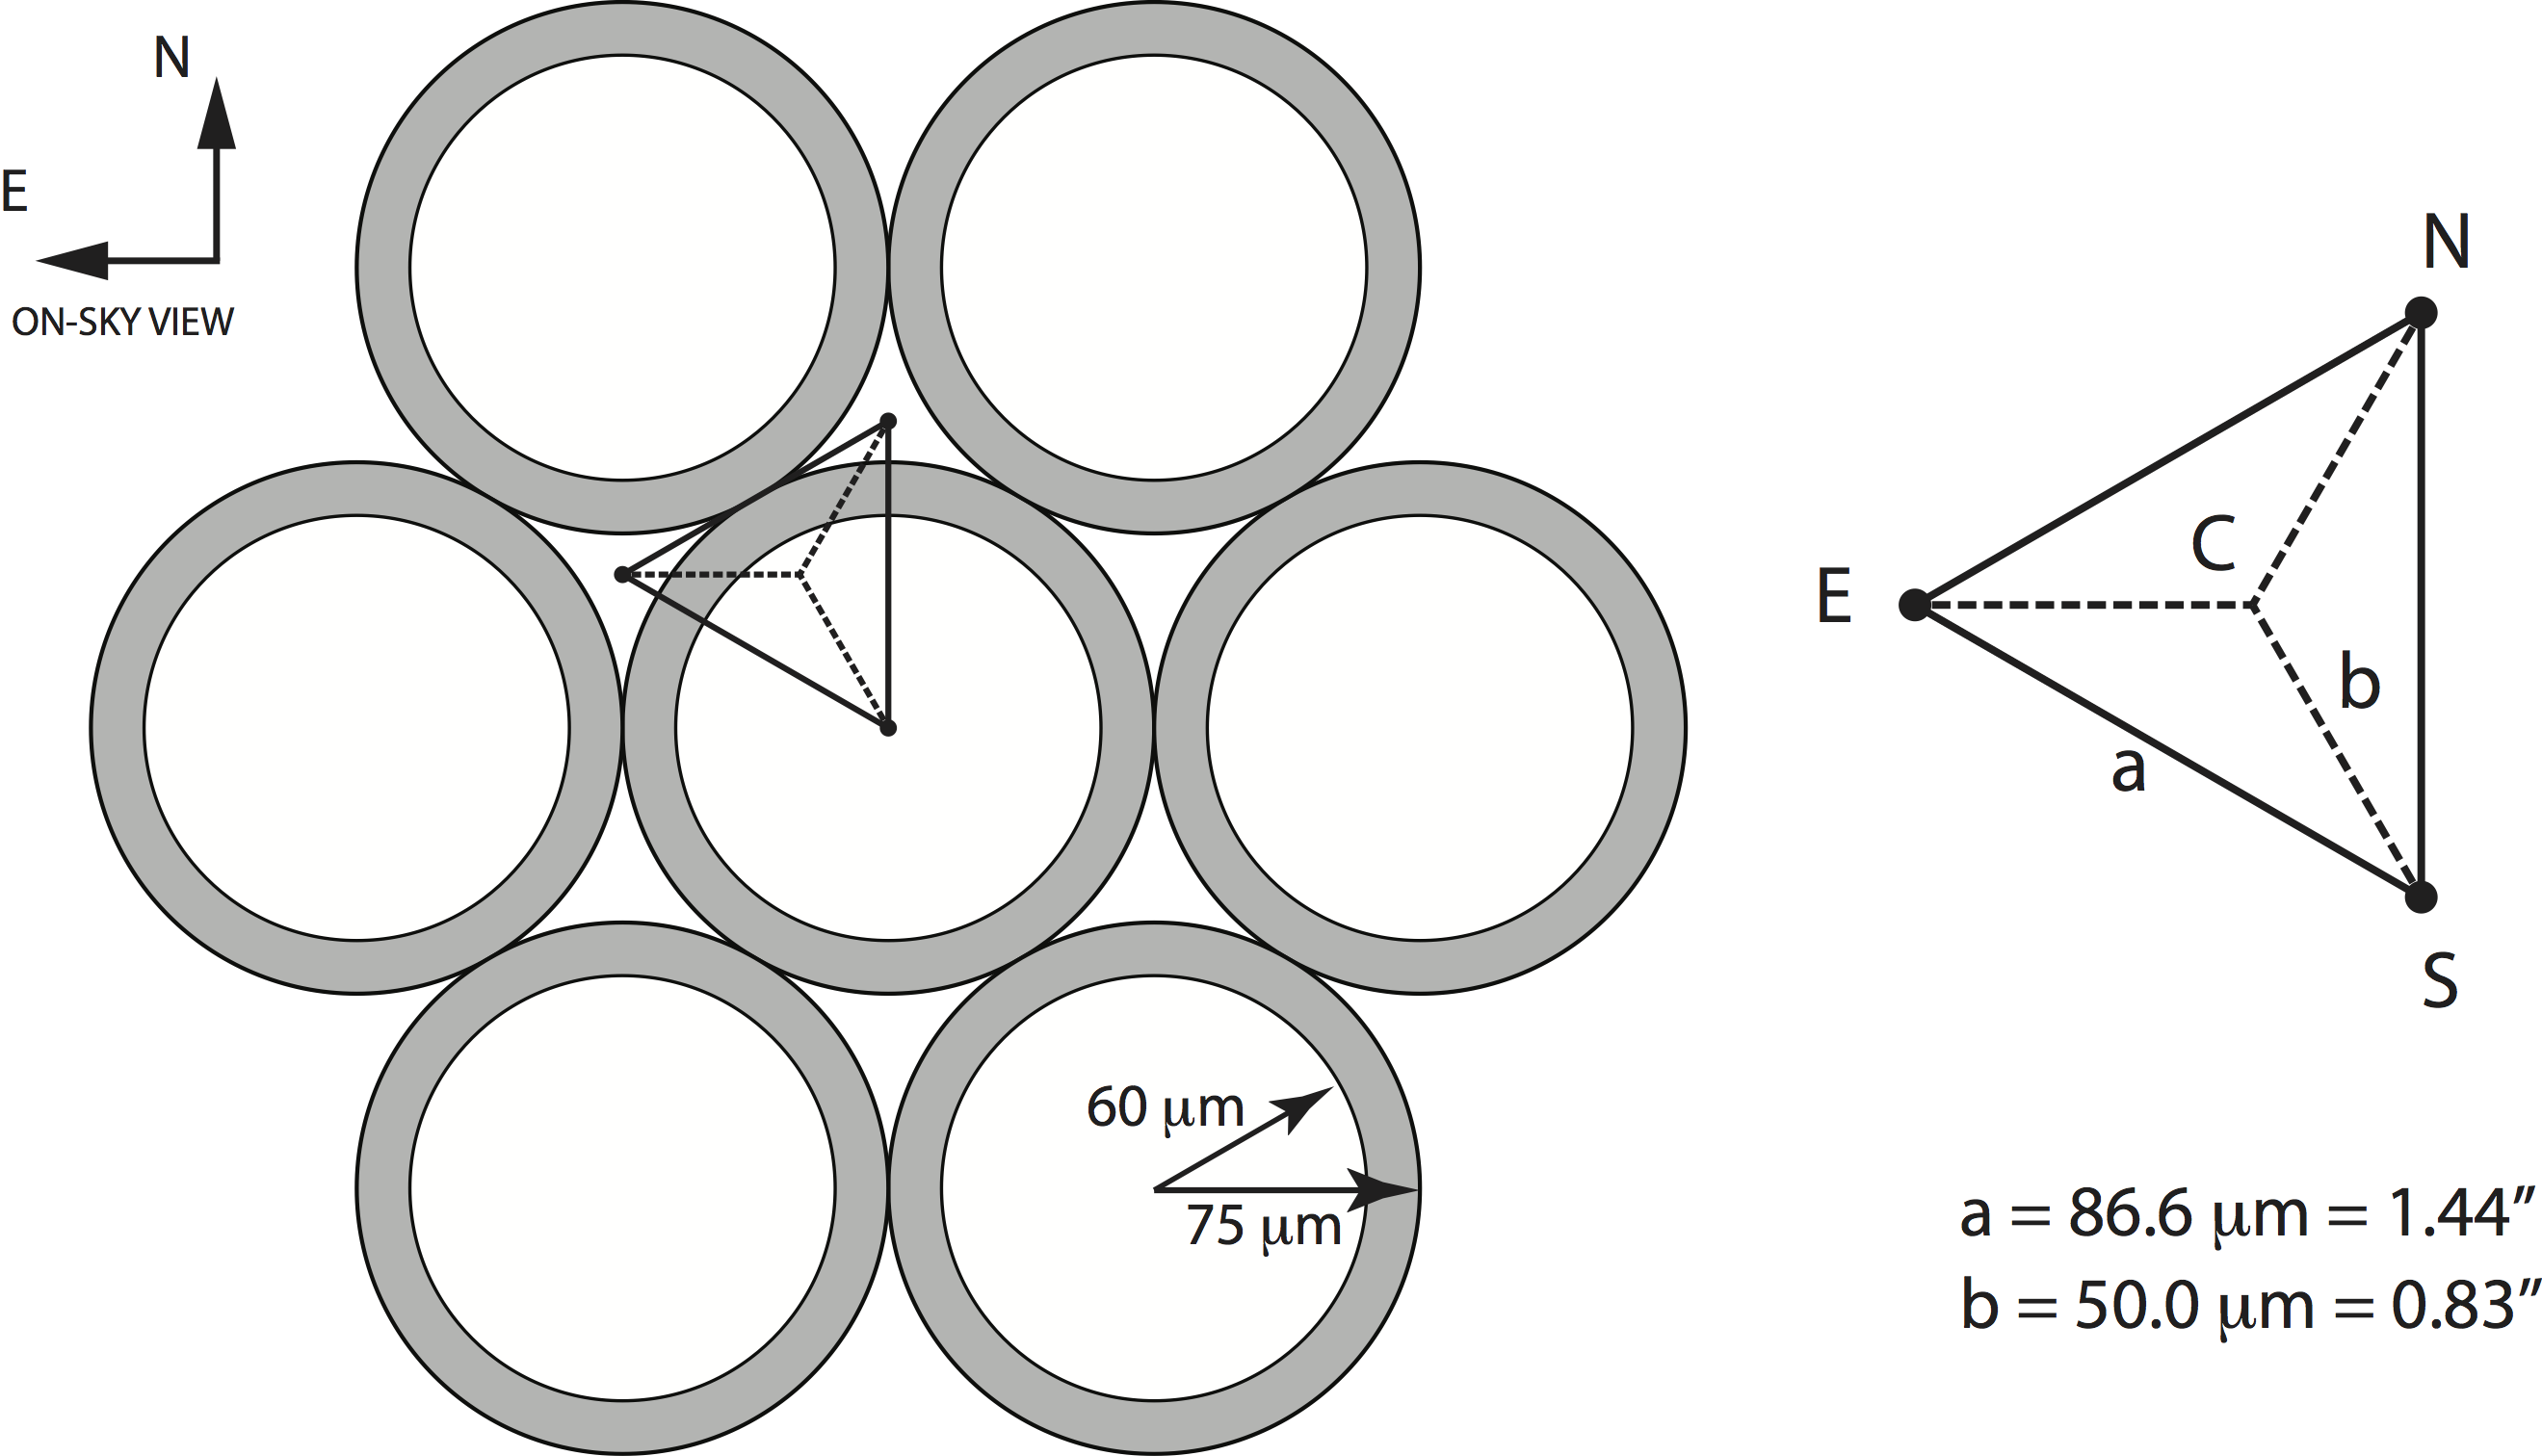 Schematic diagram of the 7 central fibers within a hexagonally packed MaNGA IFU, showing the 120 micron diameter fiber core and surrounding cladding plus buffer. The triangular figure shows the relative positions of the three dither positions; the fiber bundle is located at position "S." The central (C) "home" position is labeled, along with the north (N), south (S), and east (E) dither positions. The nominal plate scale of the SDSS telescope is 217.7358 mm degree<sup>-1</sup>, or 60.48 microns arcsec<sup>-1</sup>. Figure and caption reproduced from <a href="http://adsabs.harvard.edu/abs/2015AJ....150...19L">Law et al. (2015)</a>.